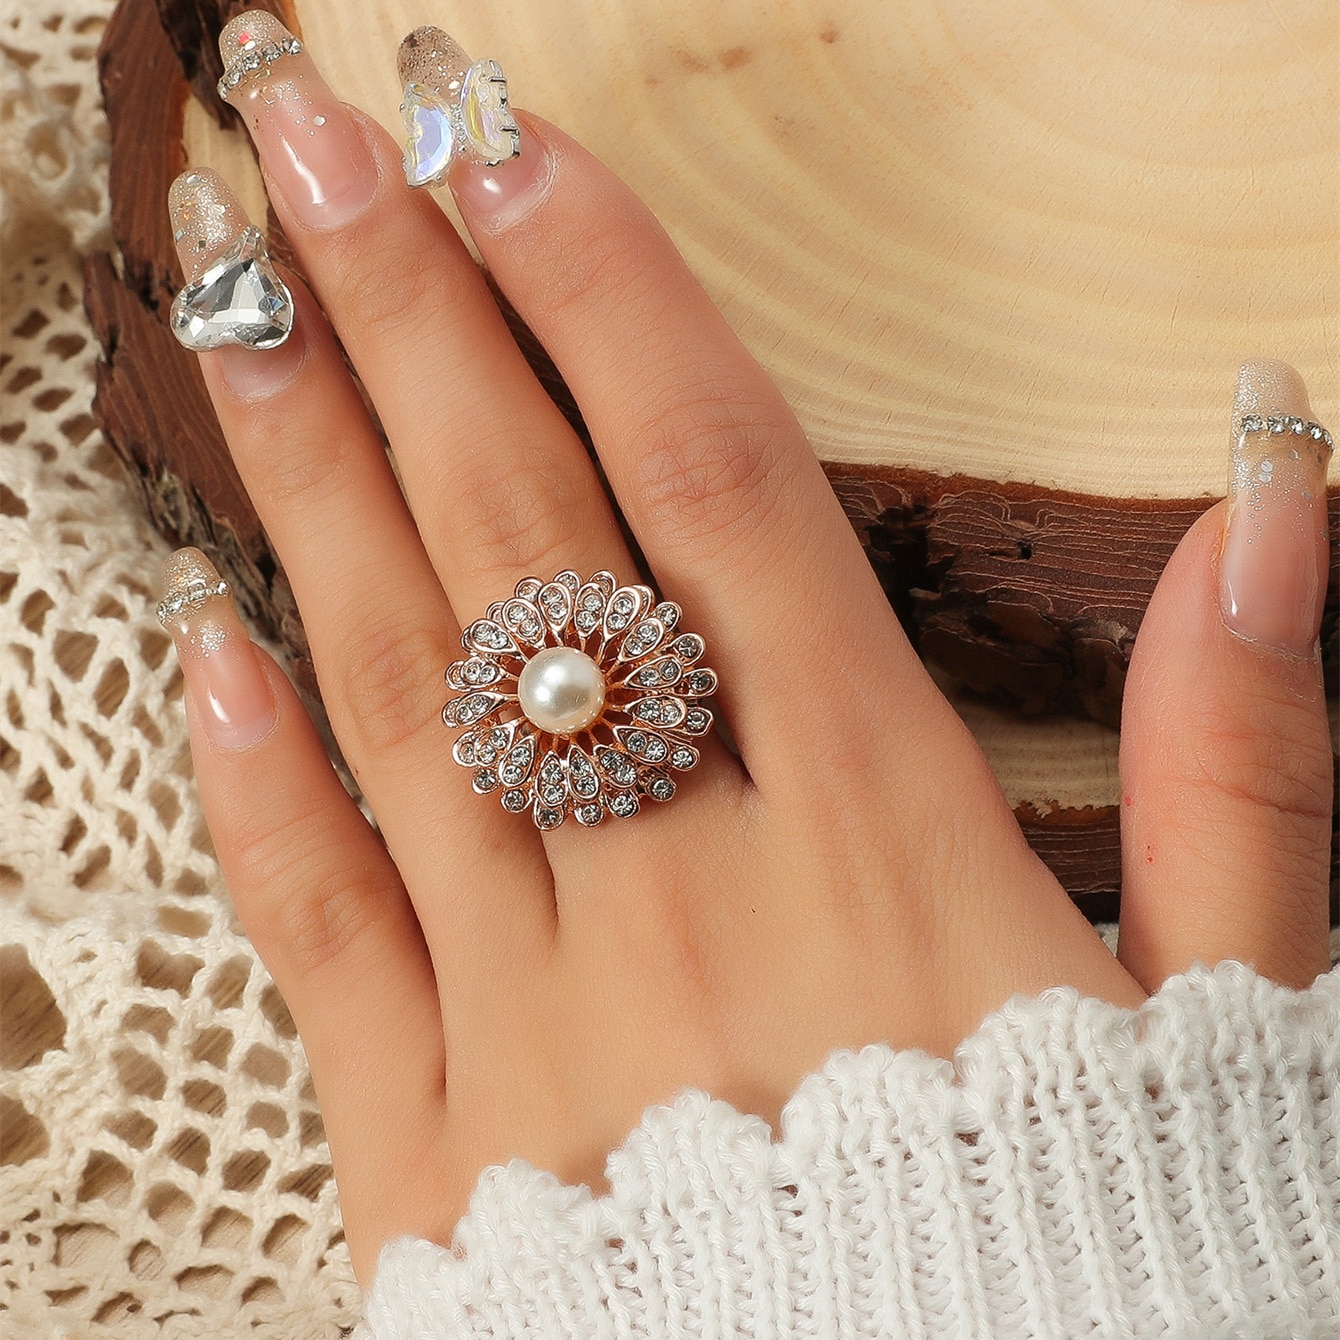 New-Retro-Small-Flower-CZ-Rings-Indian-Jewelry-Retro-Cute-Pearl-Finger-Ring-Banquet-Jewelry-Female-G-1005004336840341-2